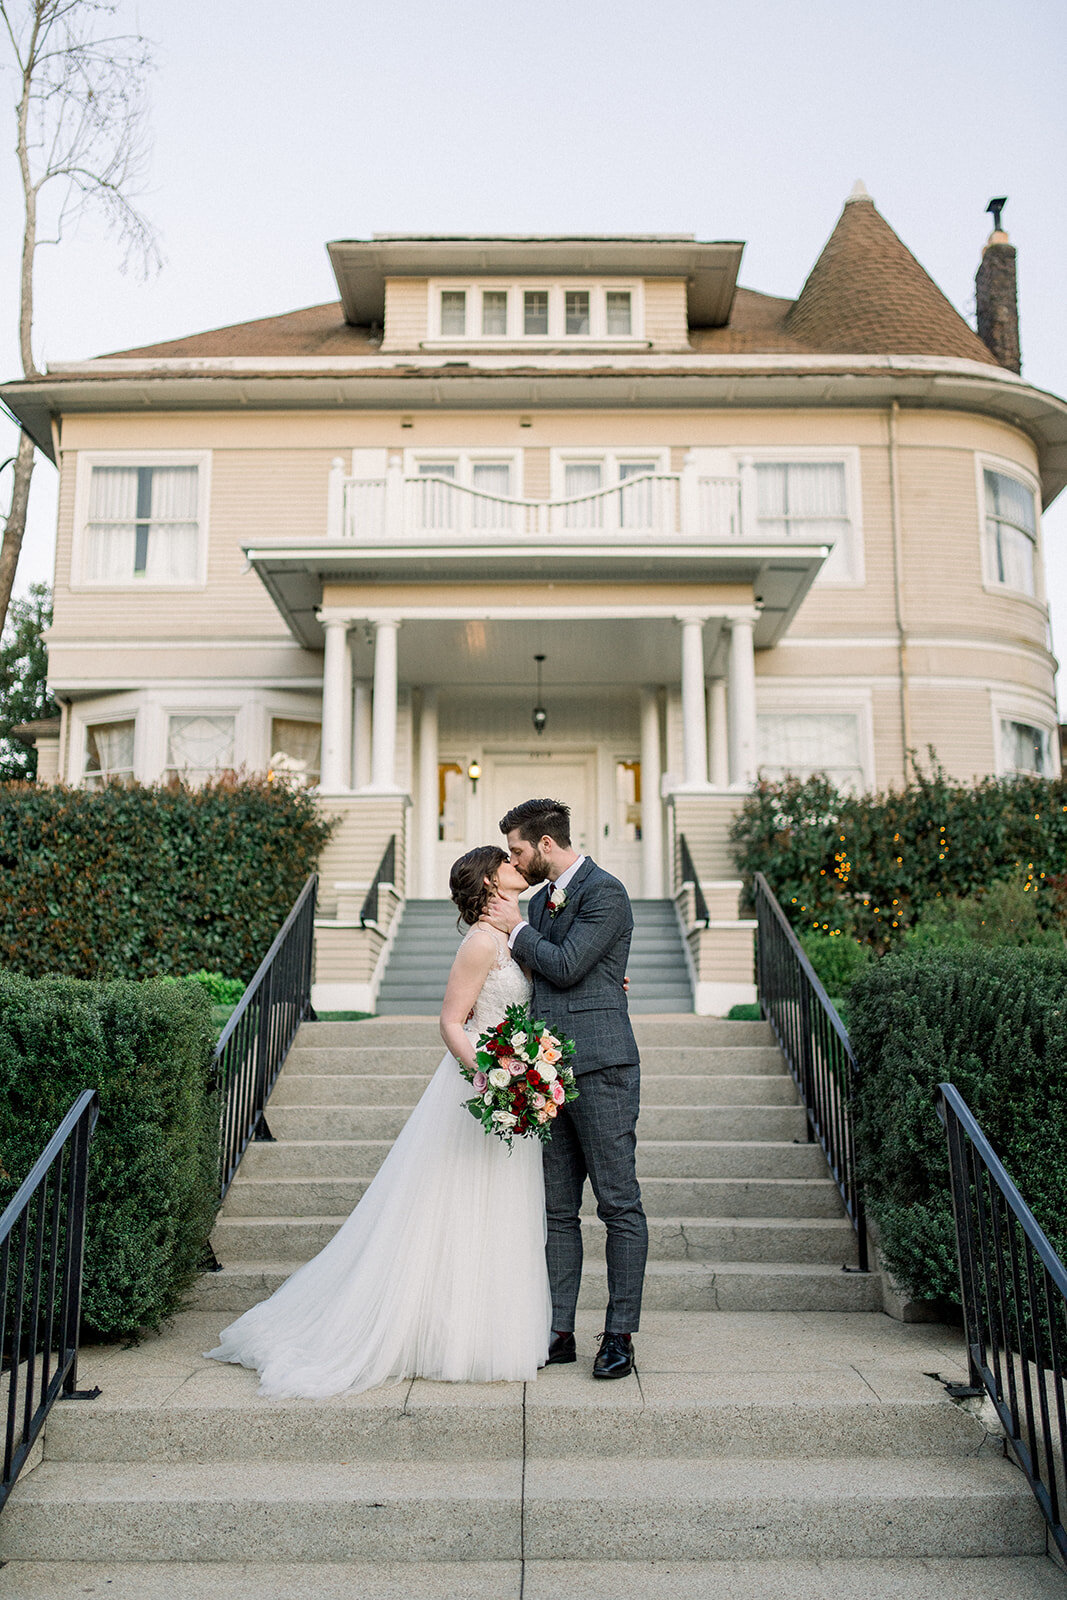 In this captivating image, Tiffany Longeway captures the unique charm of a wedding couple in Old Town Sacramento, CA. The historic ambiance and timeless elegance of the venue provide a perfect backdrop for their special day.